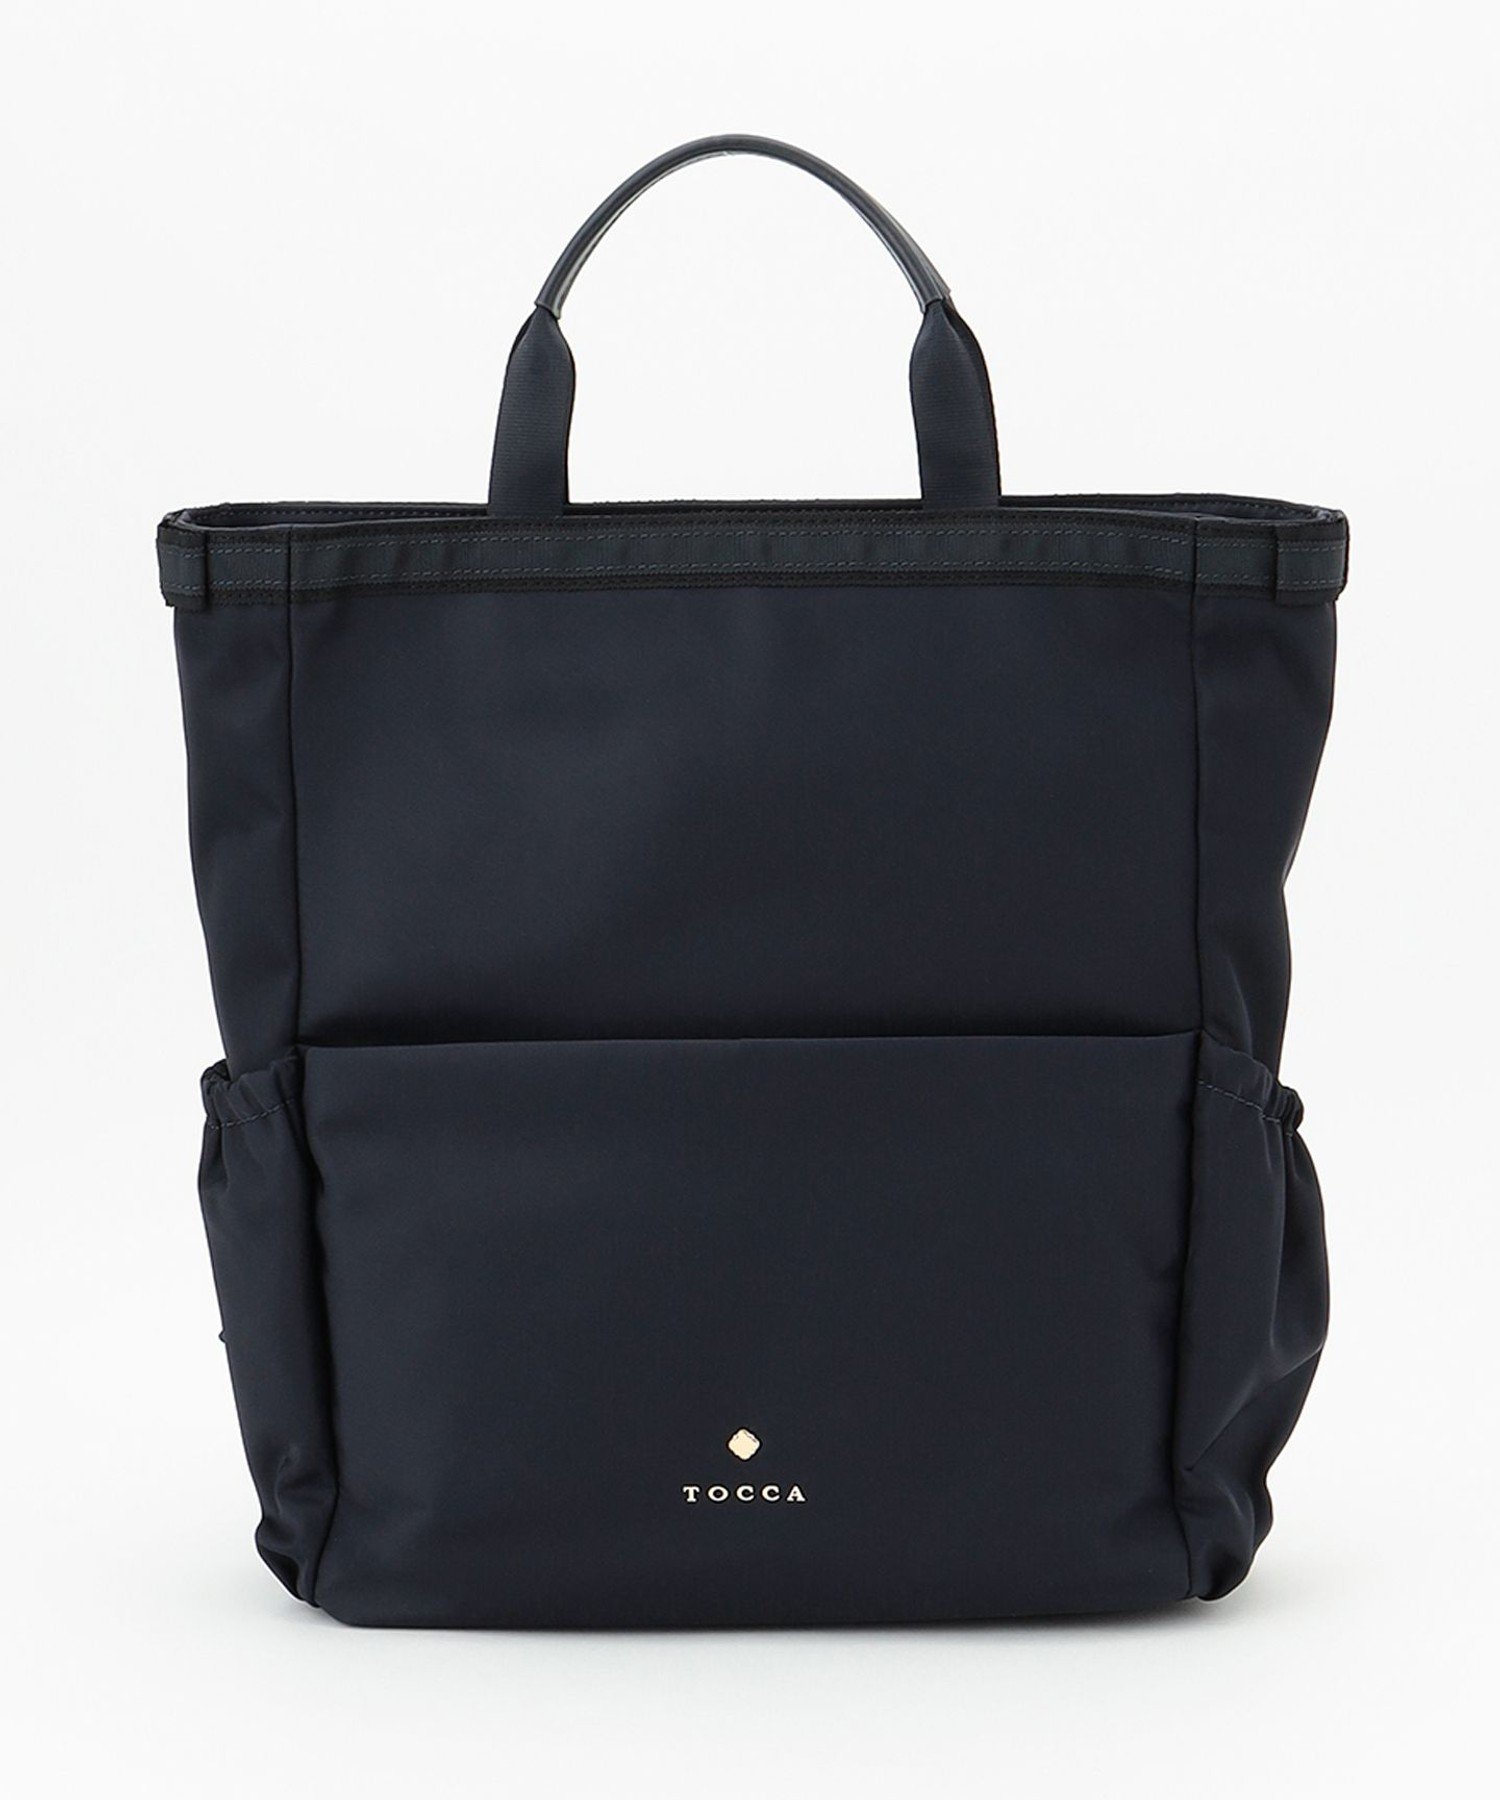 TOCCA｜SIDERIBBON BACKPACK TOTE バックパックトートバッグ | Rakuten 